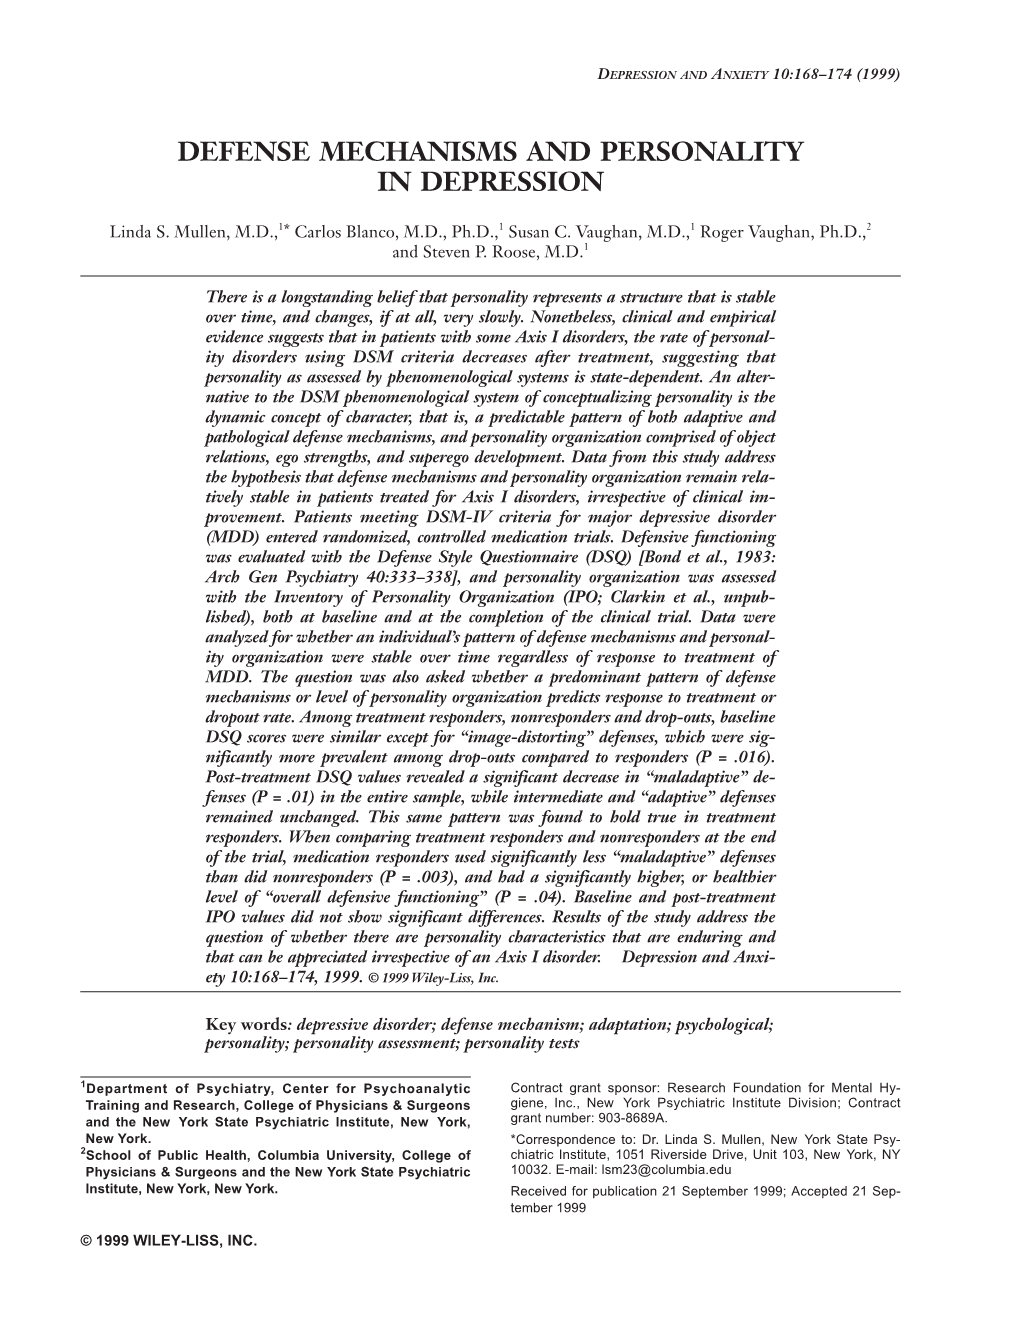 Defense Mechanisms and Personality in Depression